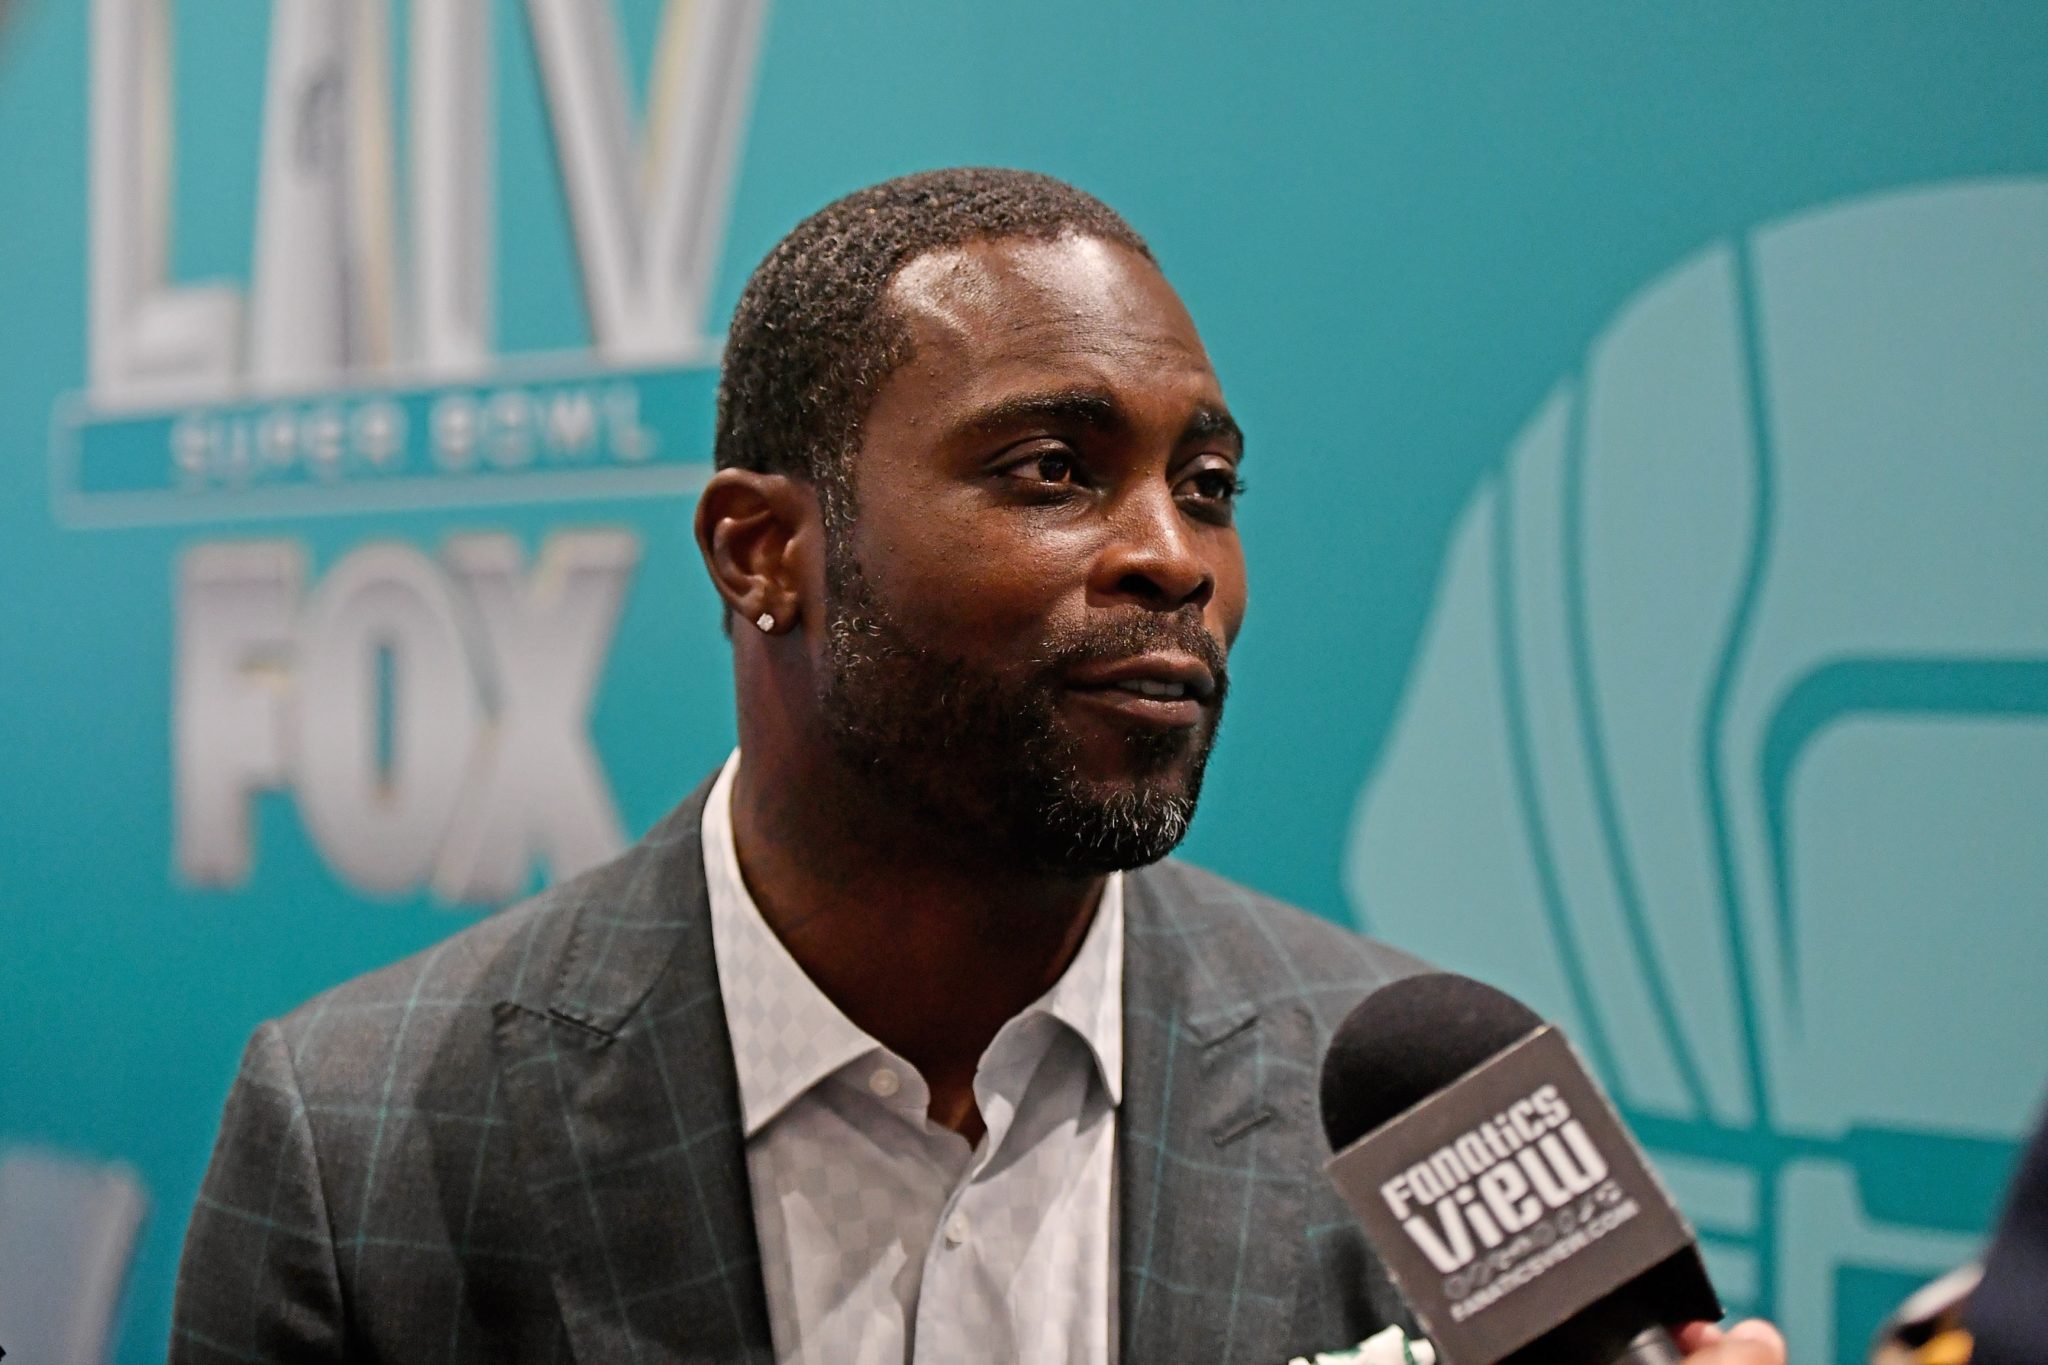 Mike Vick Got His Butt Kicked in Chess By a 12 Year Old While In Philly